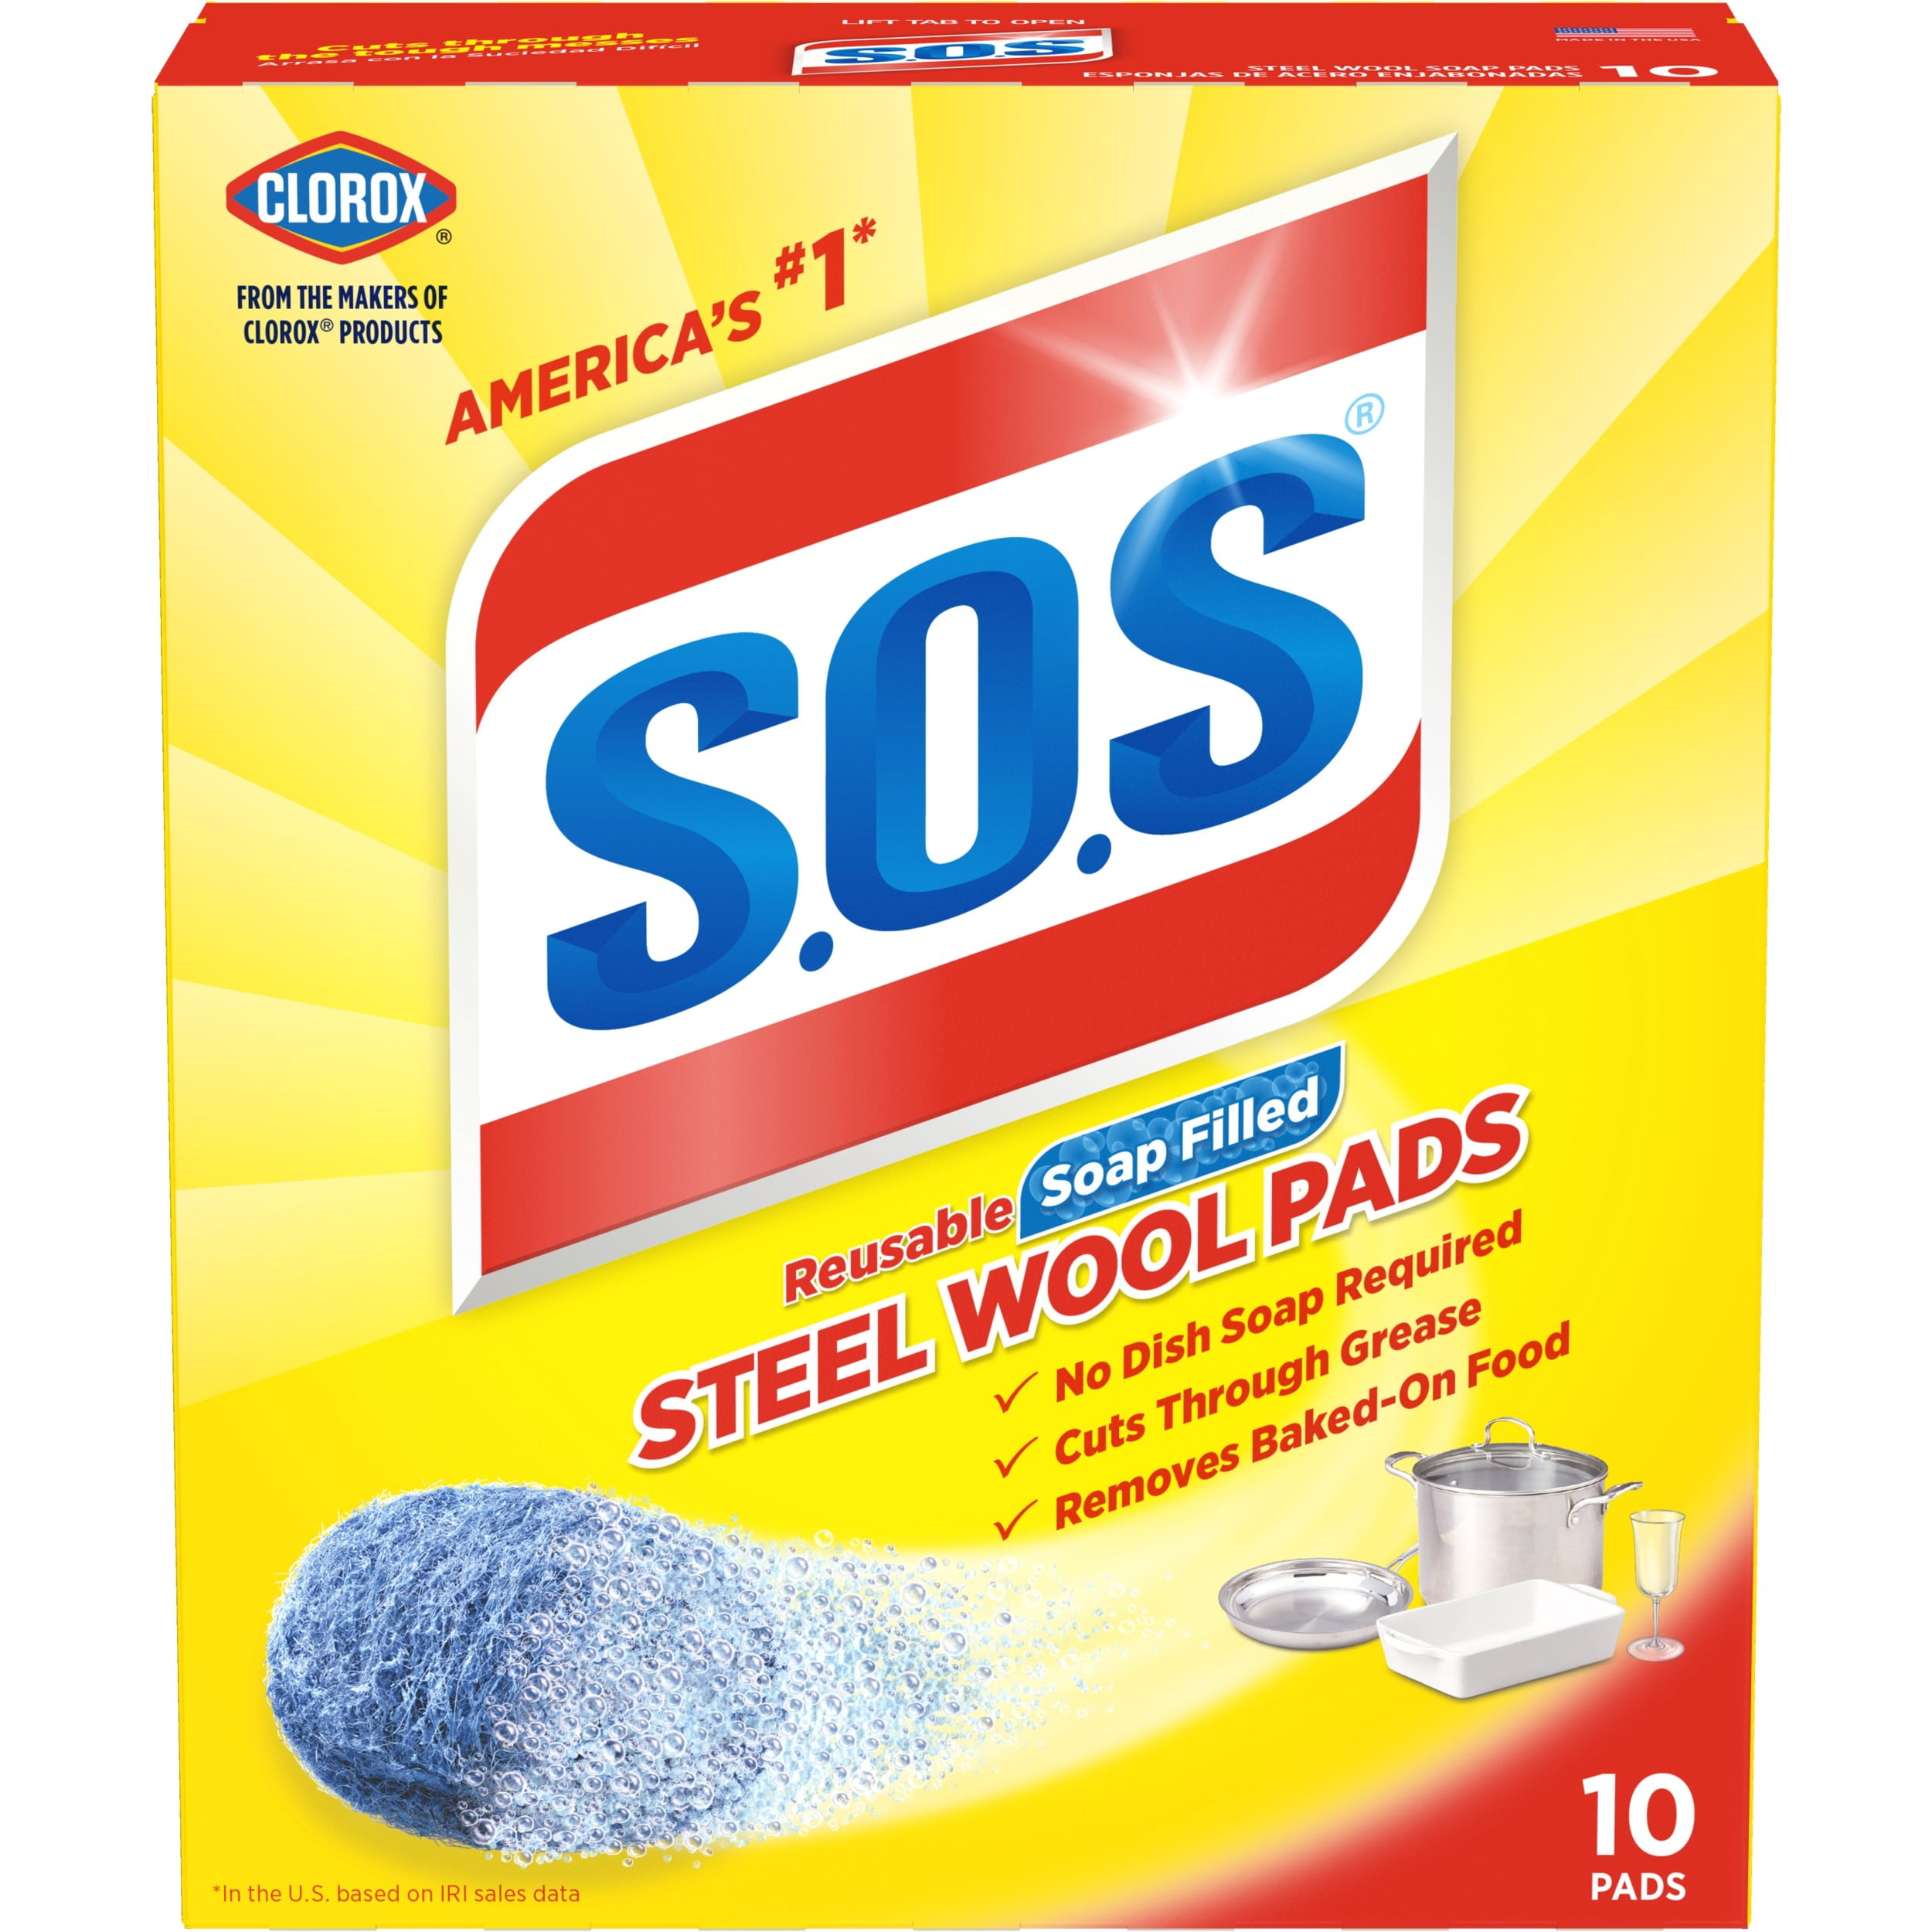 20 Pads Total USA 2 Boxes SUN RAY Steel Wool Pads NO.00 Very Fine Great Price 